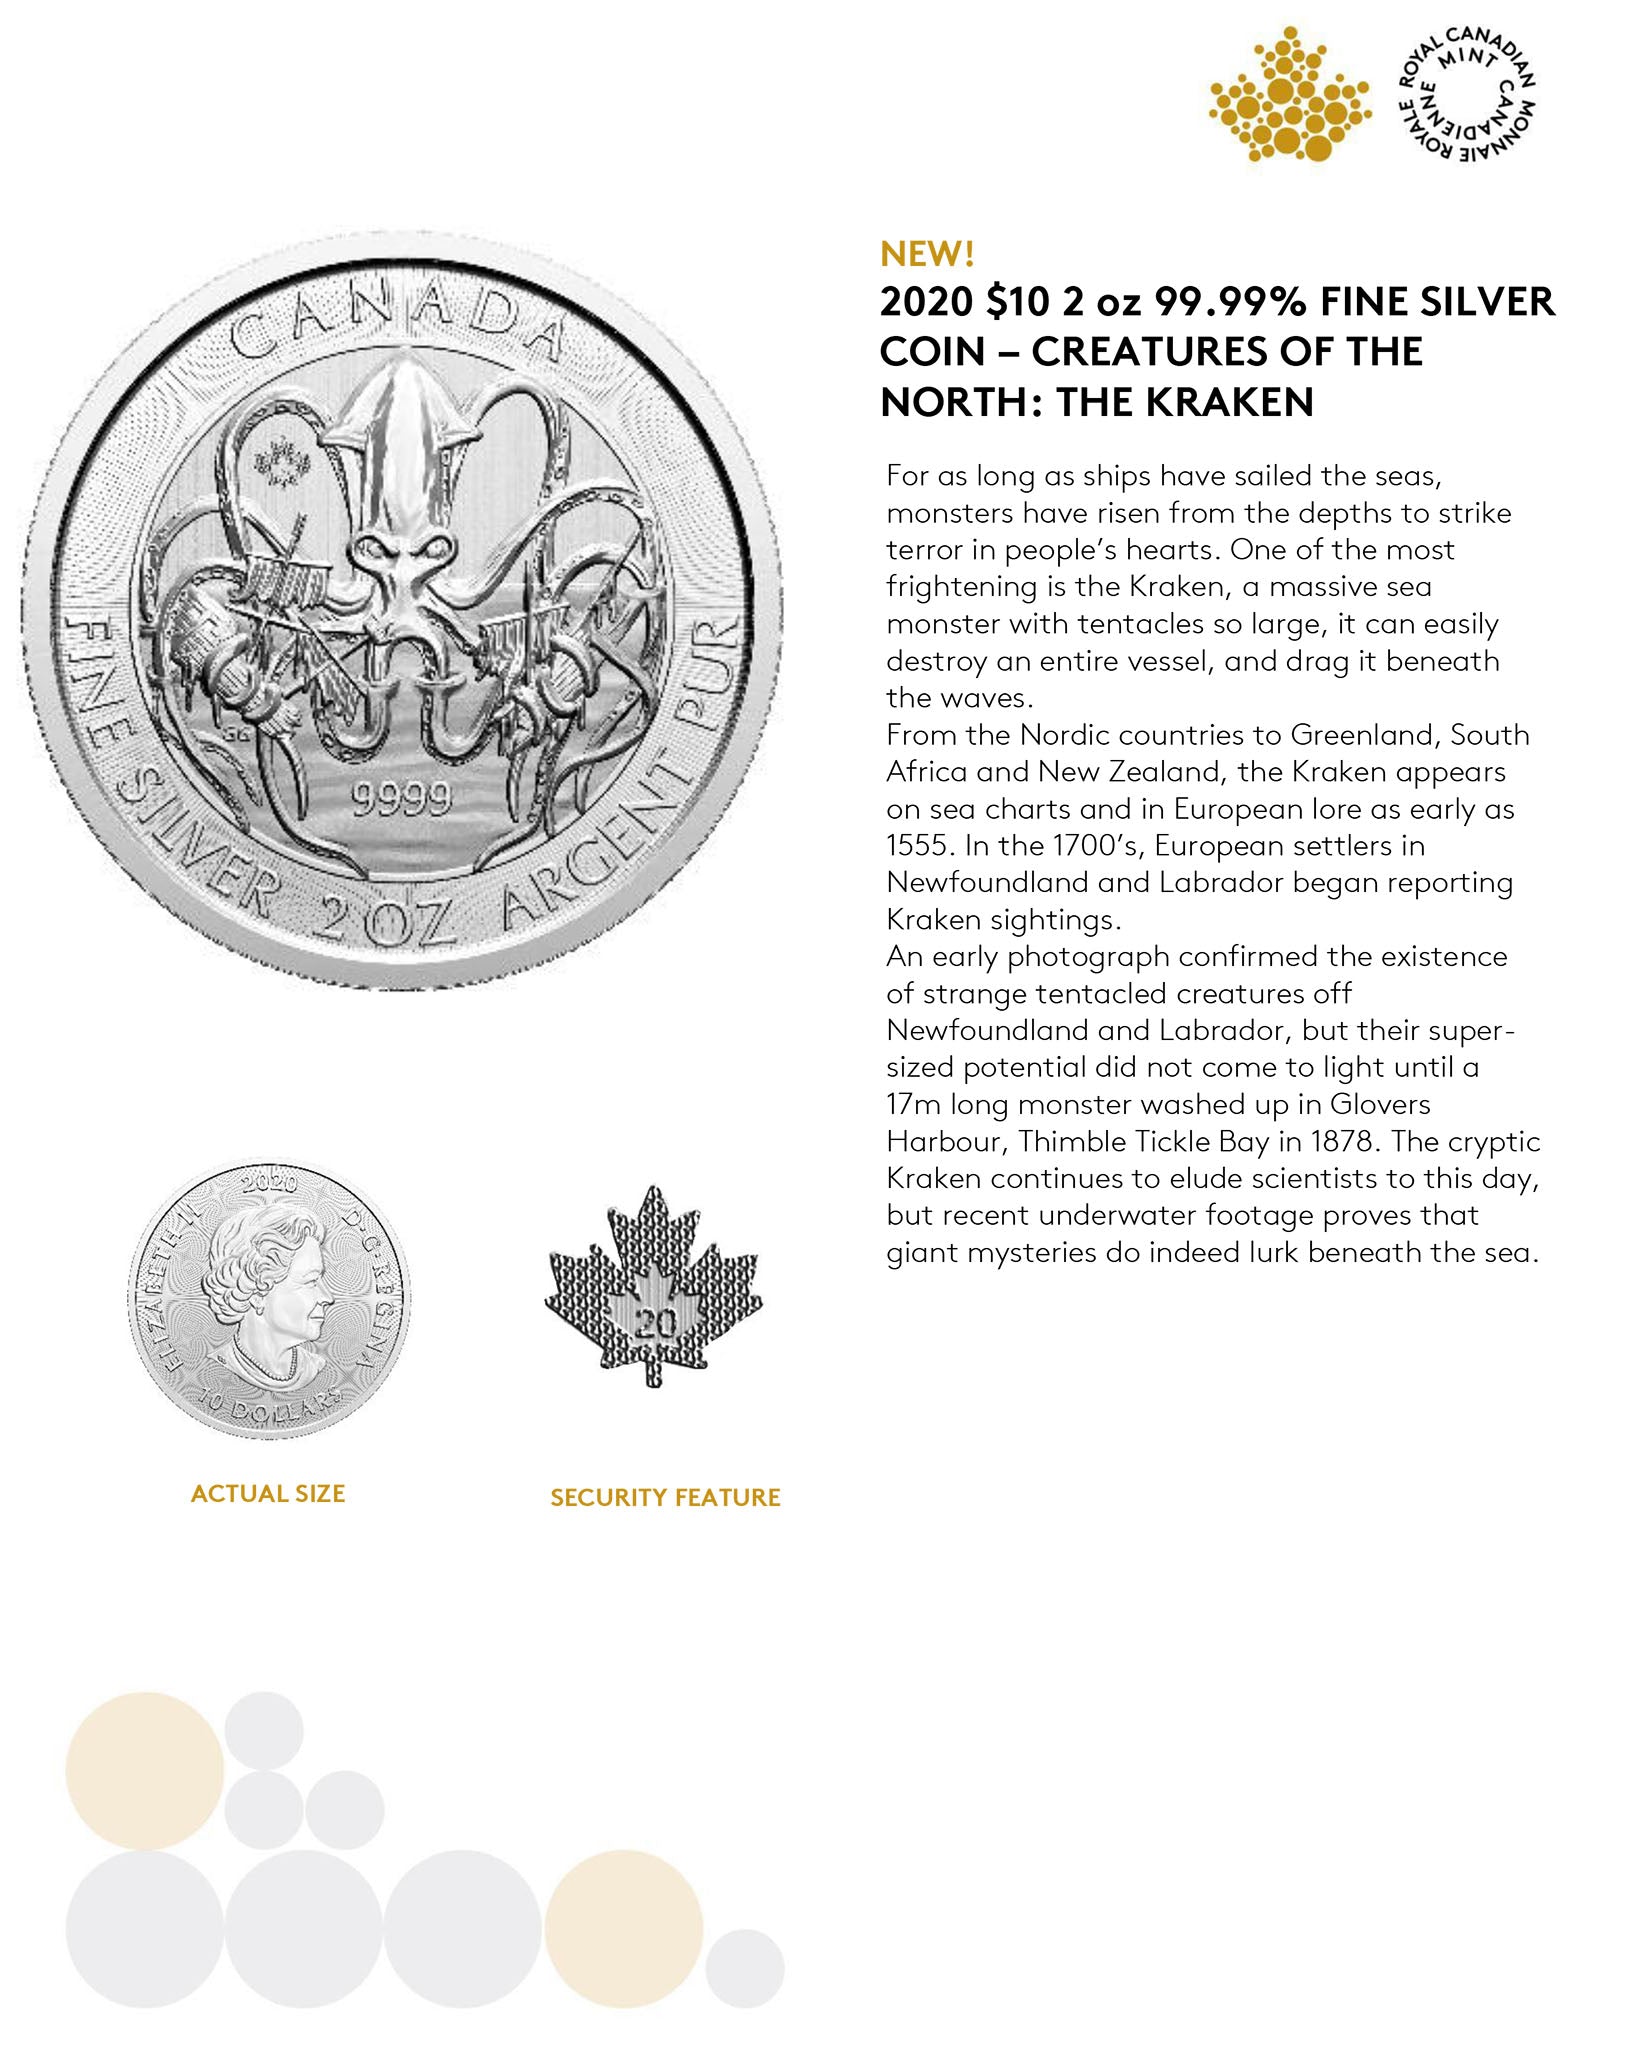 BUY 2 oz 2020 Canadian Silver KRAKEN Coin - Creatures of the North RCM Series - .9999 AG - Royal Canadian Mint